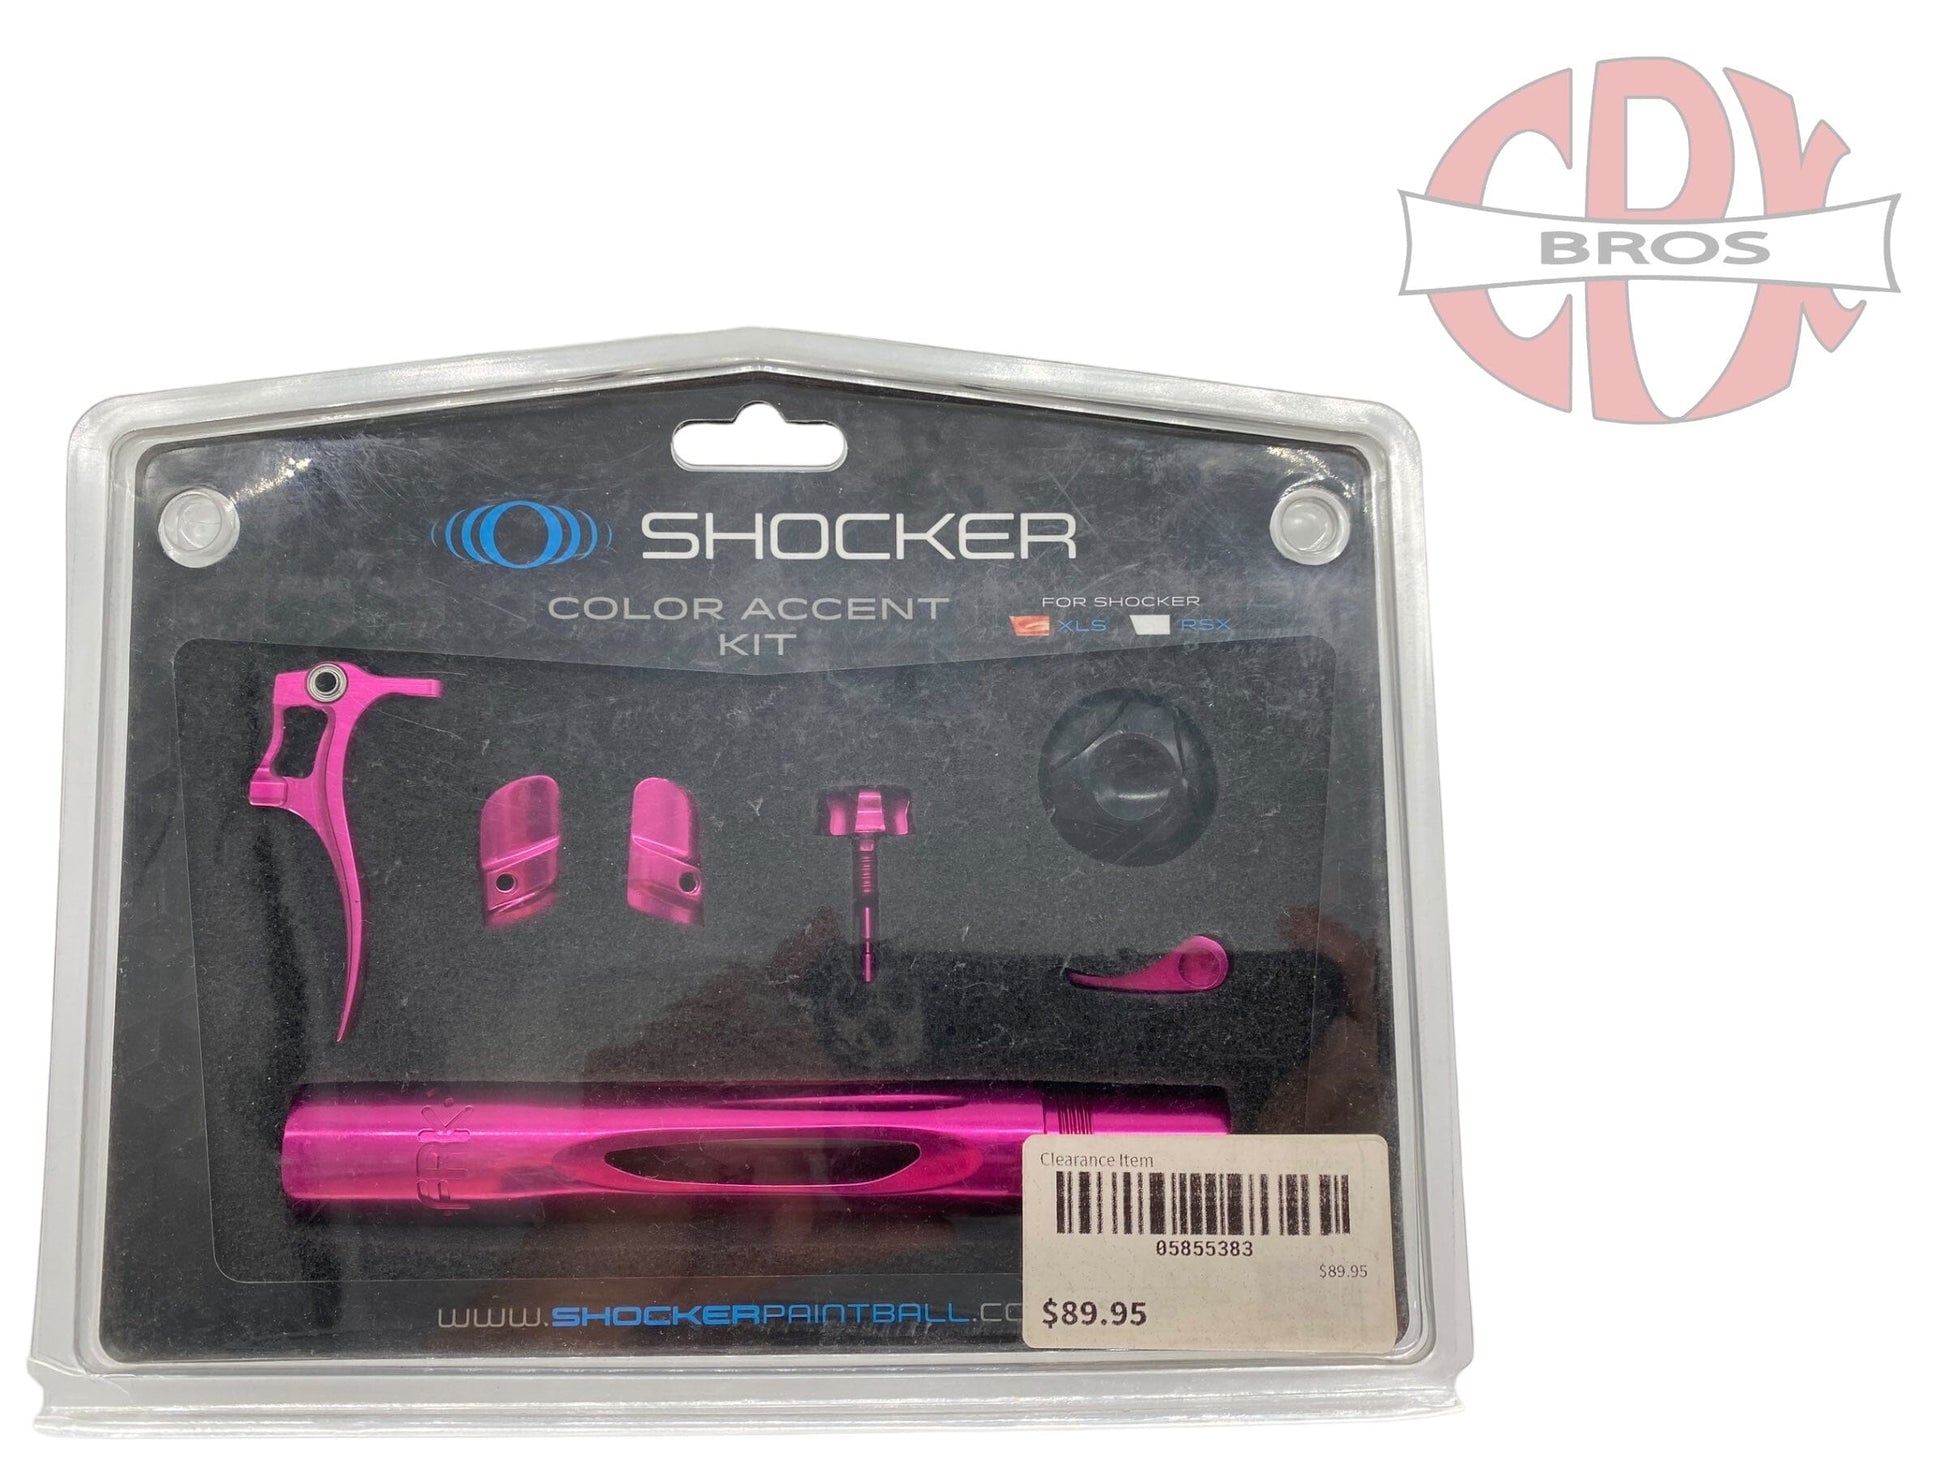 Used Shocker XLS Color Accent Kit- Pink Paintball Gun from CPXBrosPaintball Buy/Sell/Trade Paintball Markers, New Paintball Guns, Paintball Hoppers, Paintball Masks, and Hormesis Headbands